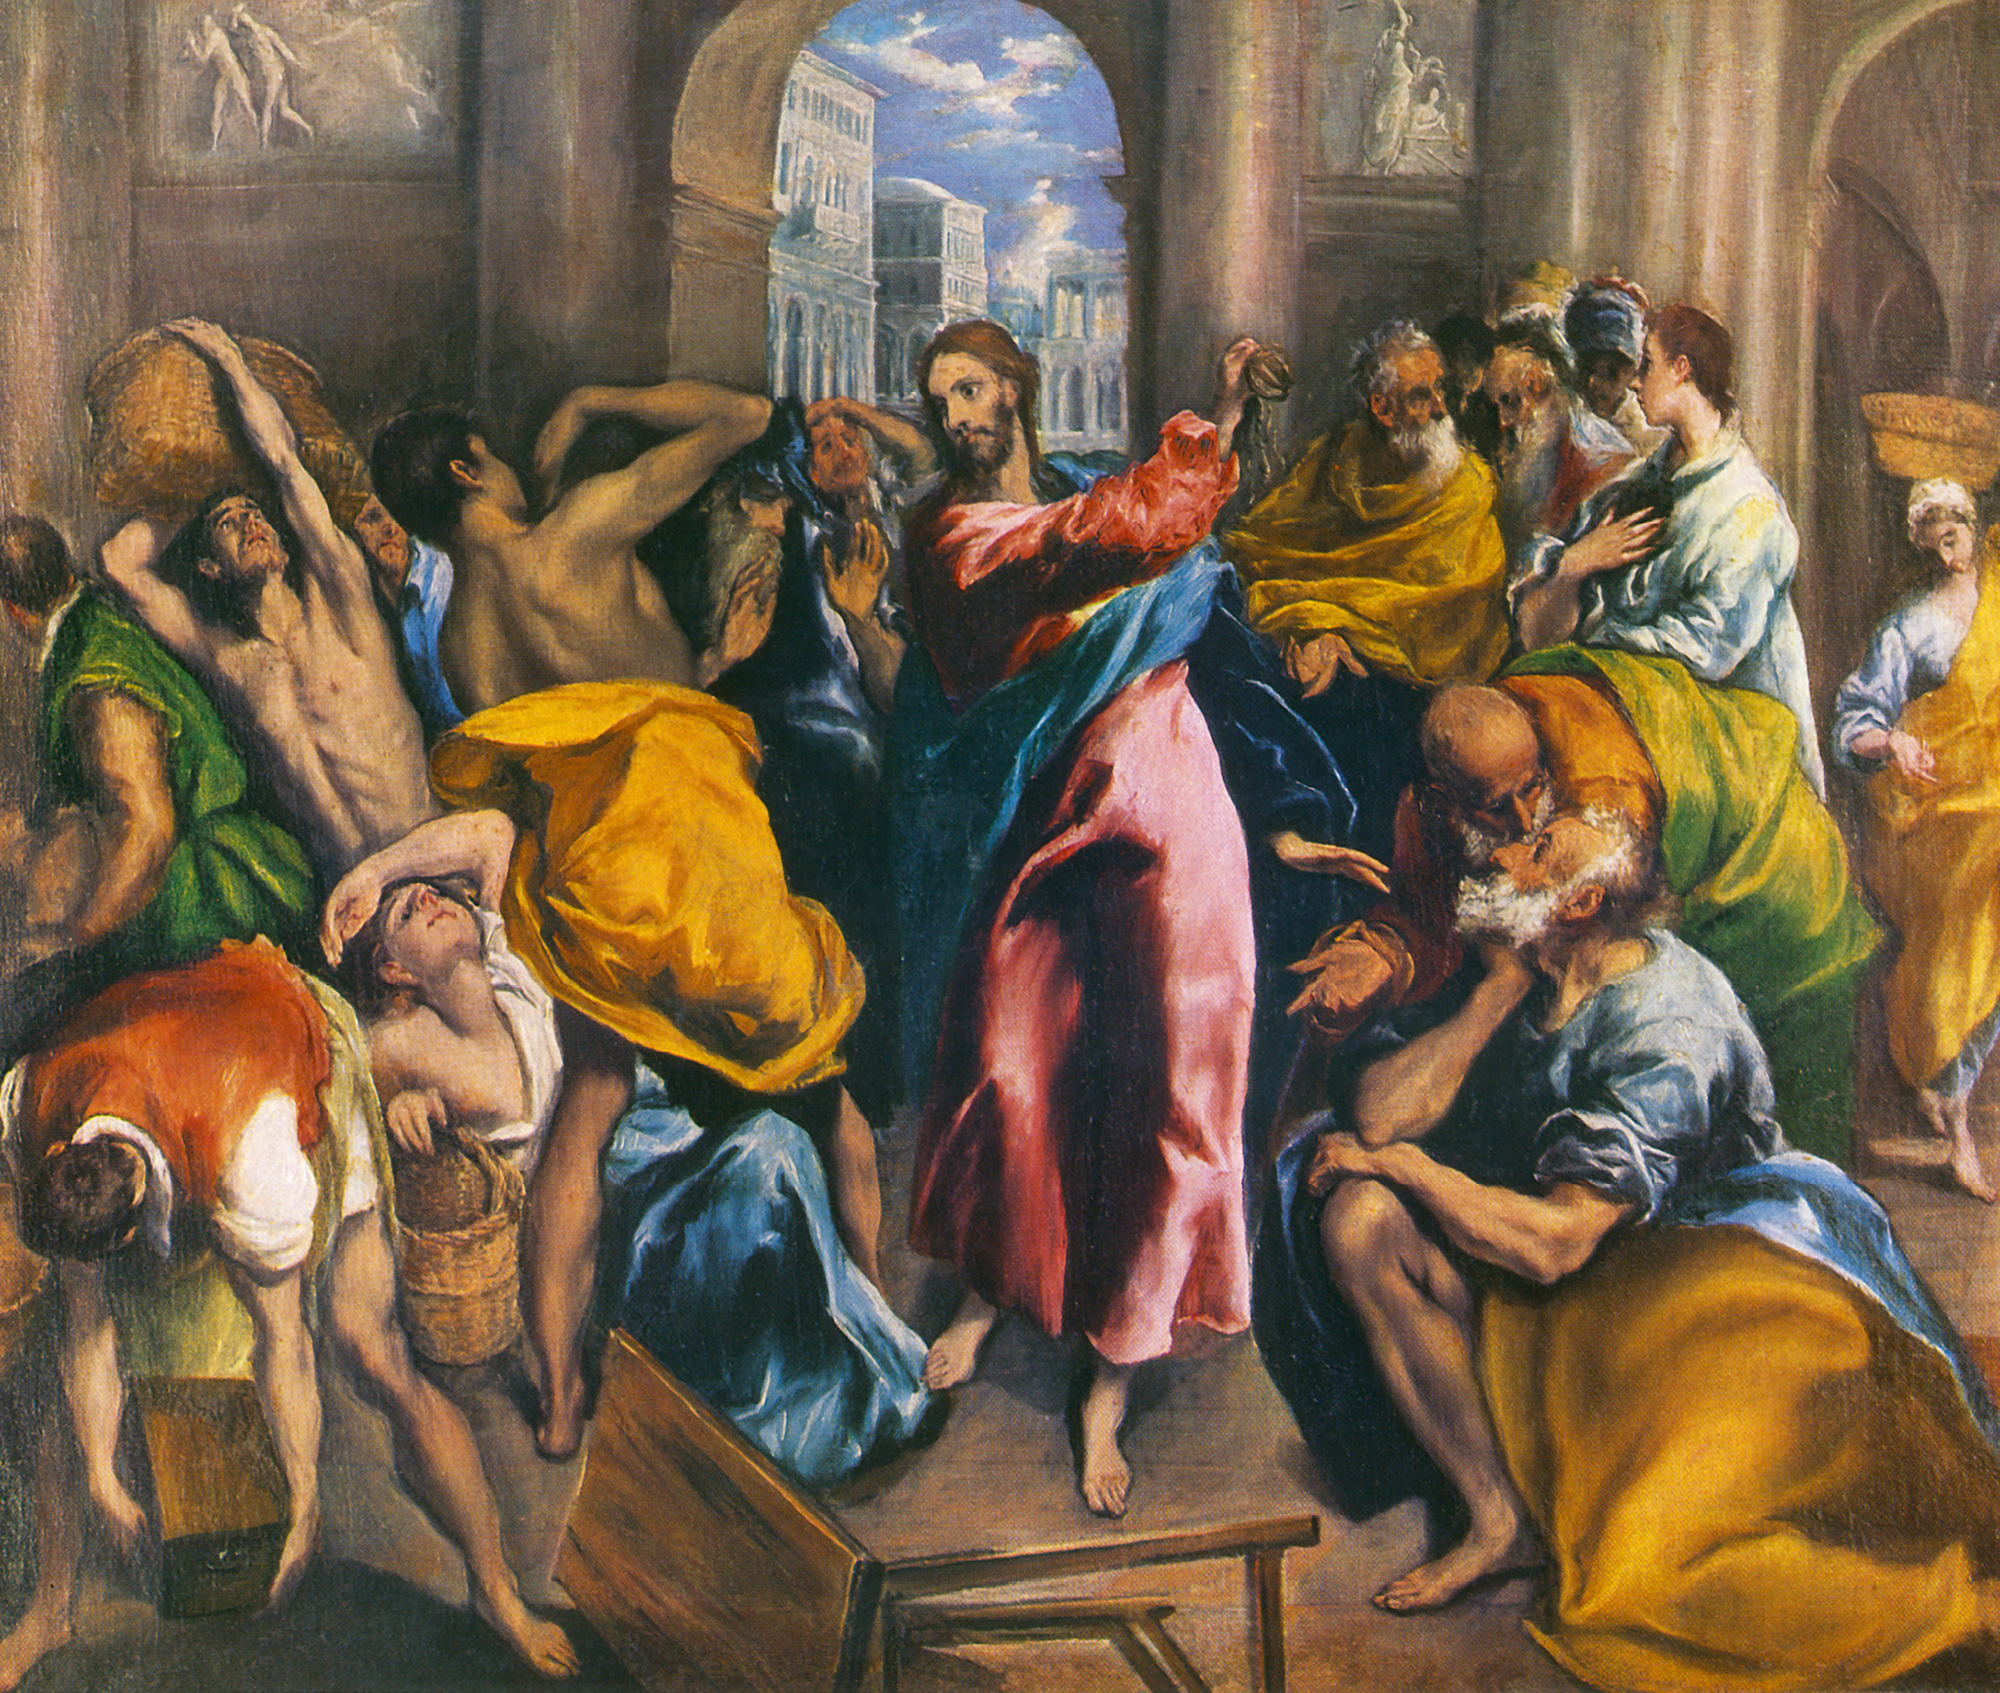 El Greco’s sixteen hundred painting titled “Christ Driving the Traders from the Temple.”